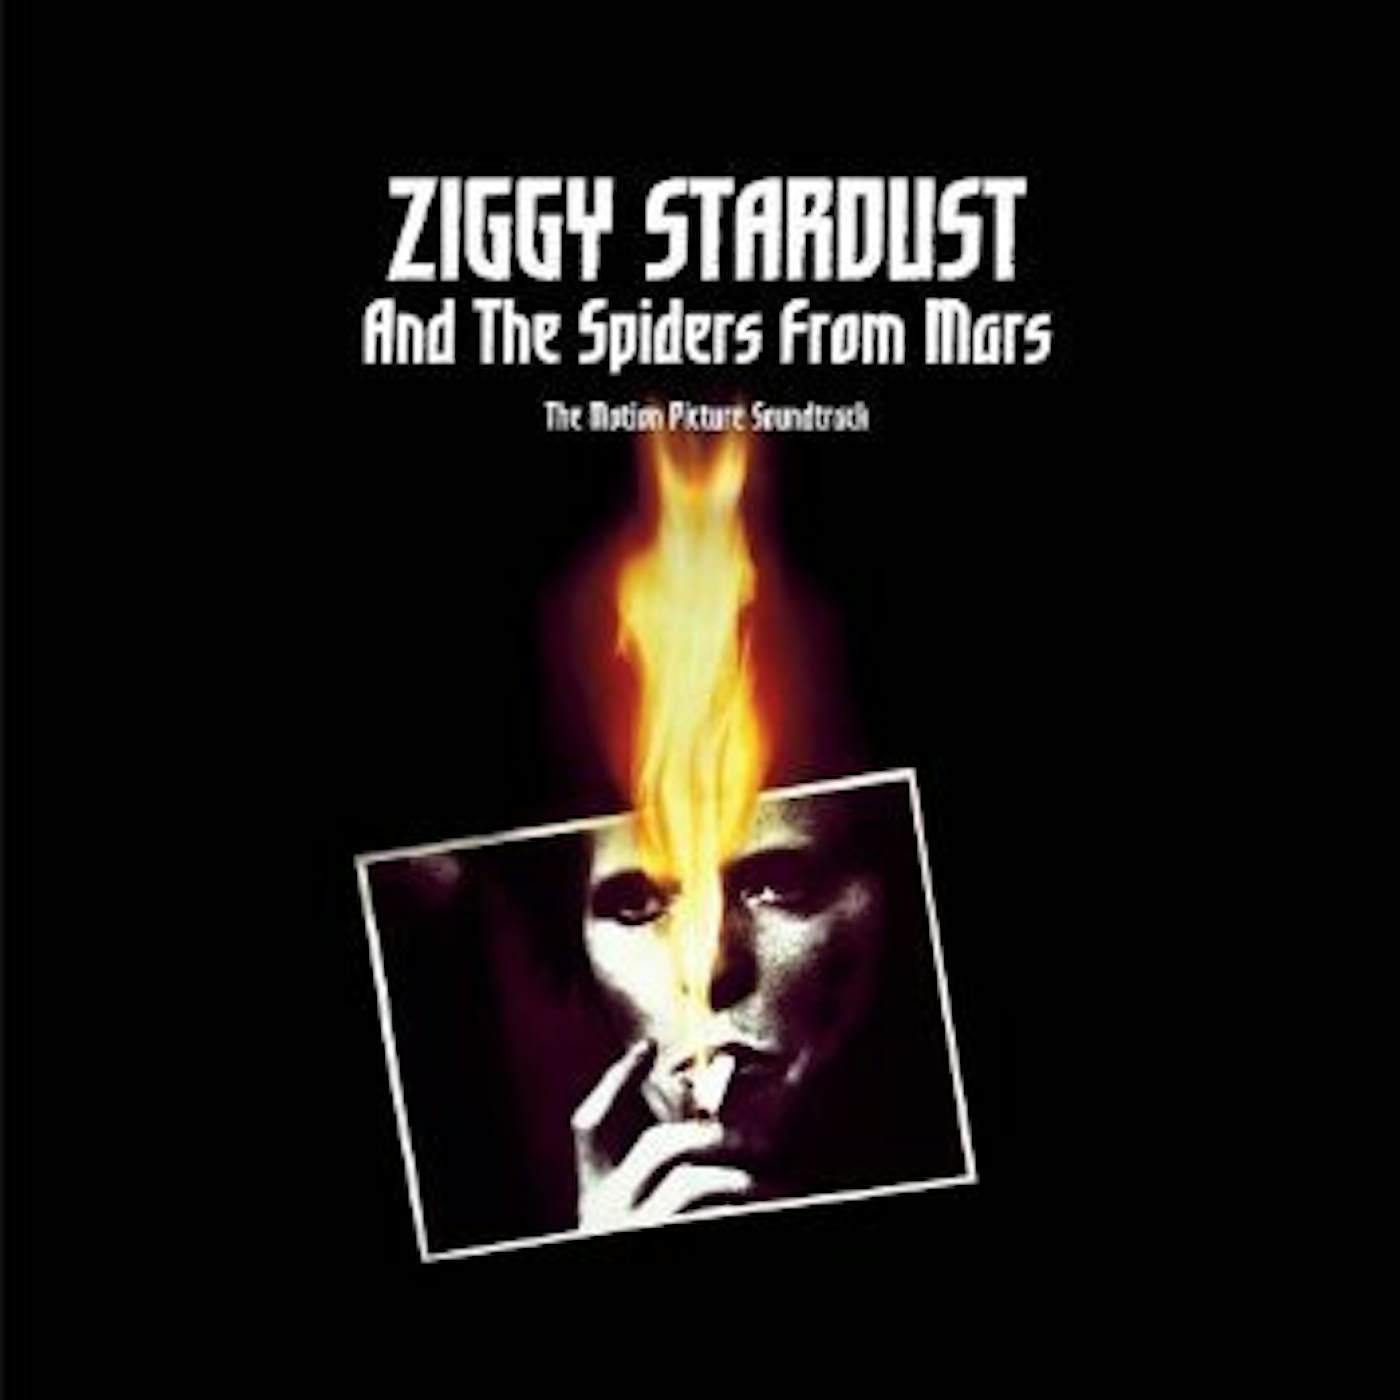 David Bowie Ziggy Stardust & the Spiders from Mars Enamel Pin